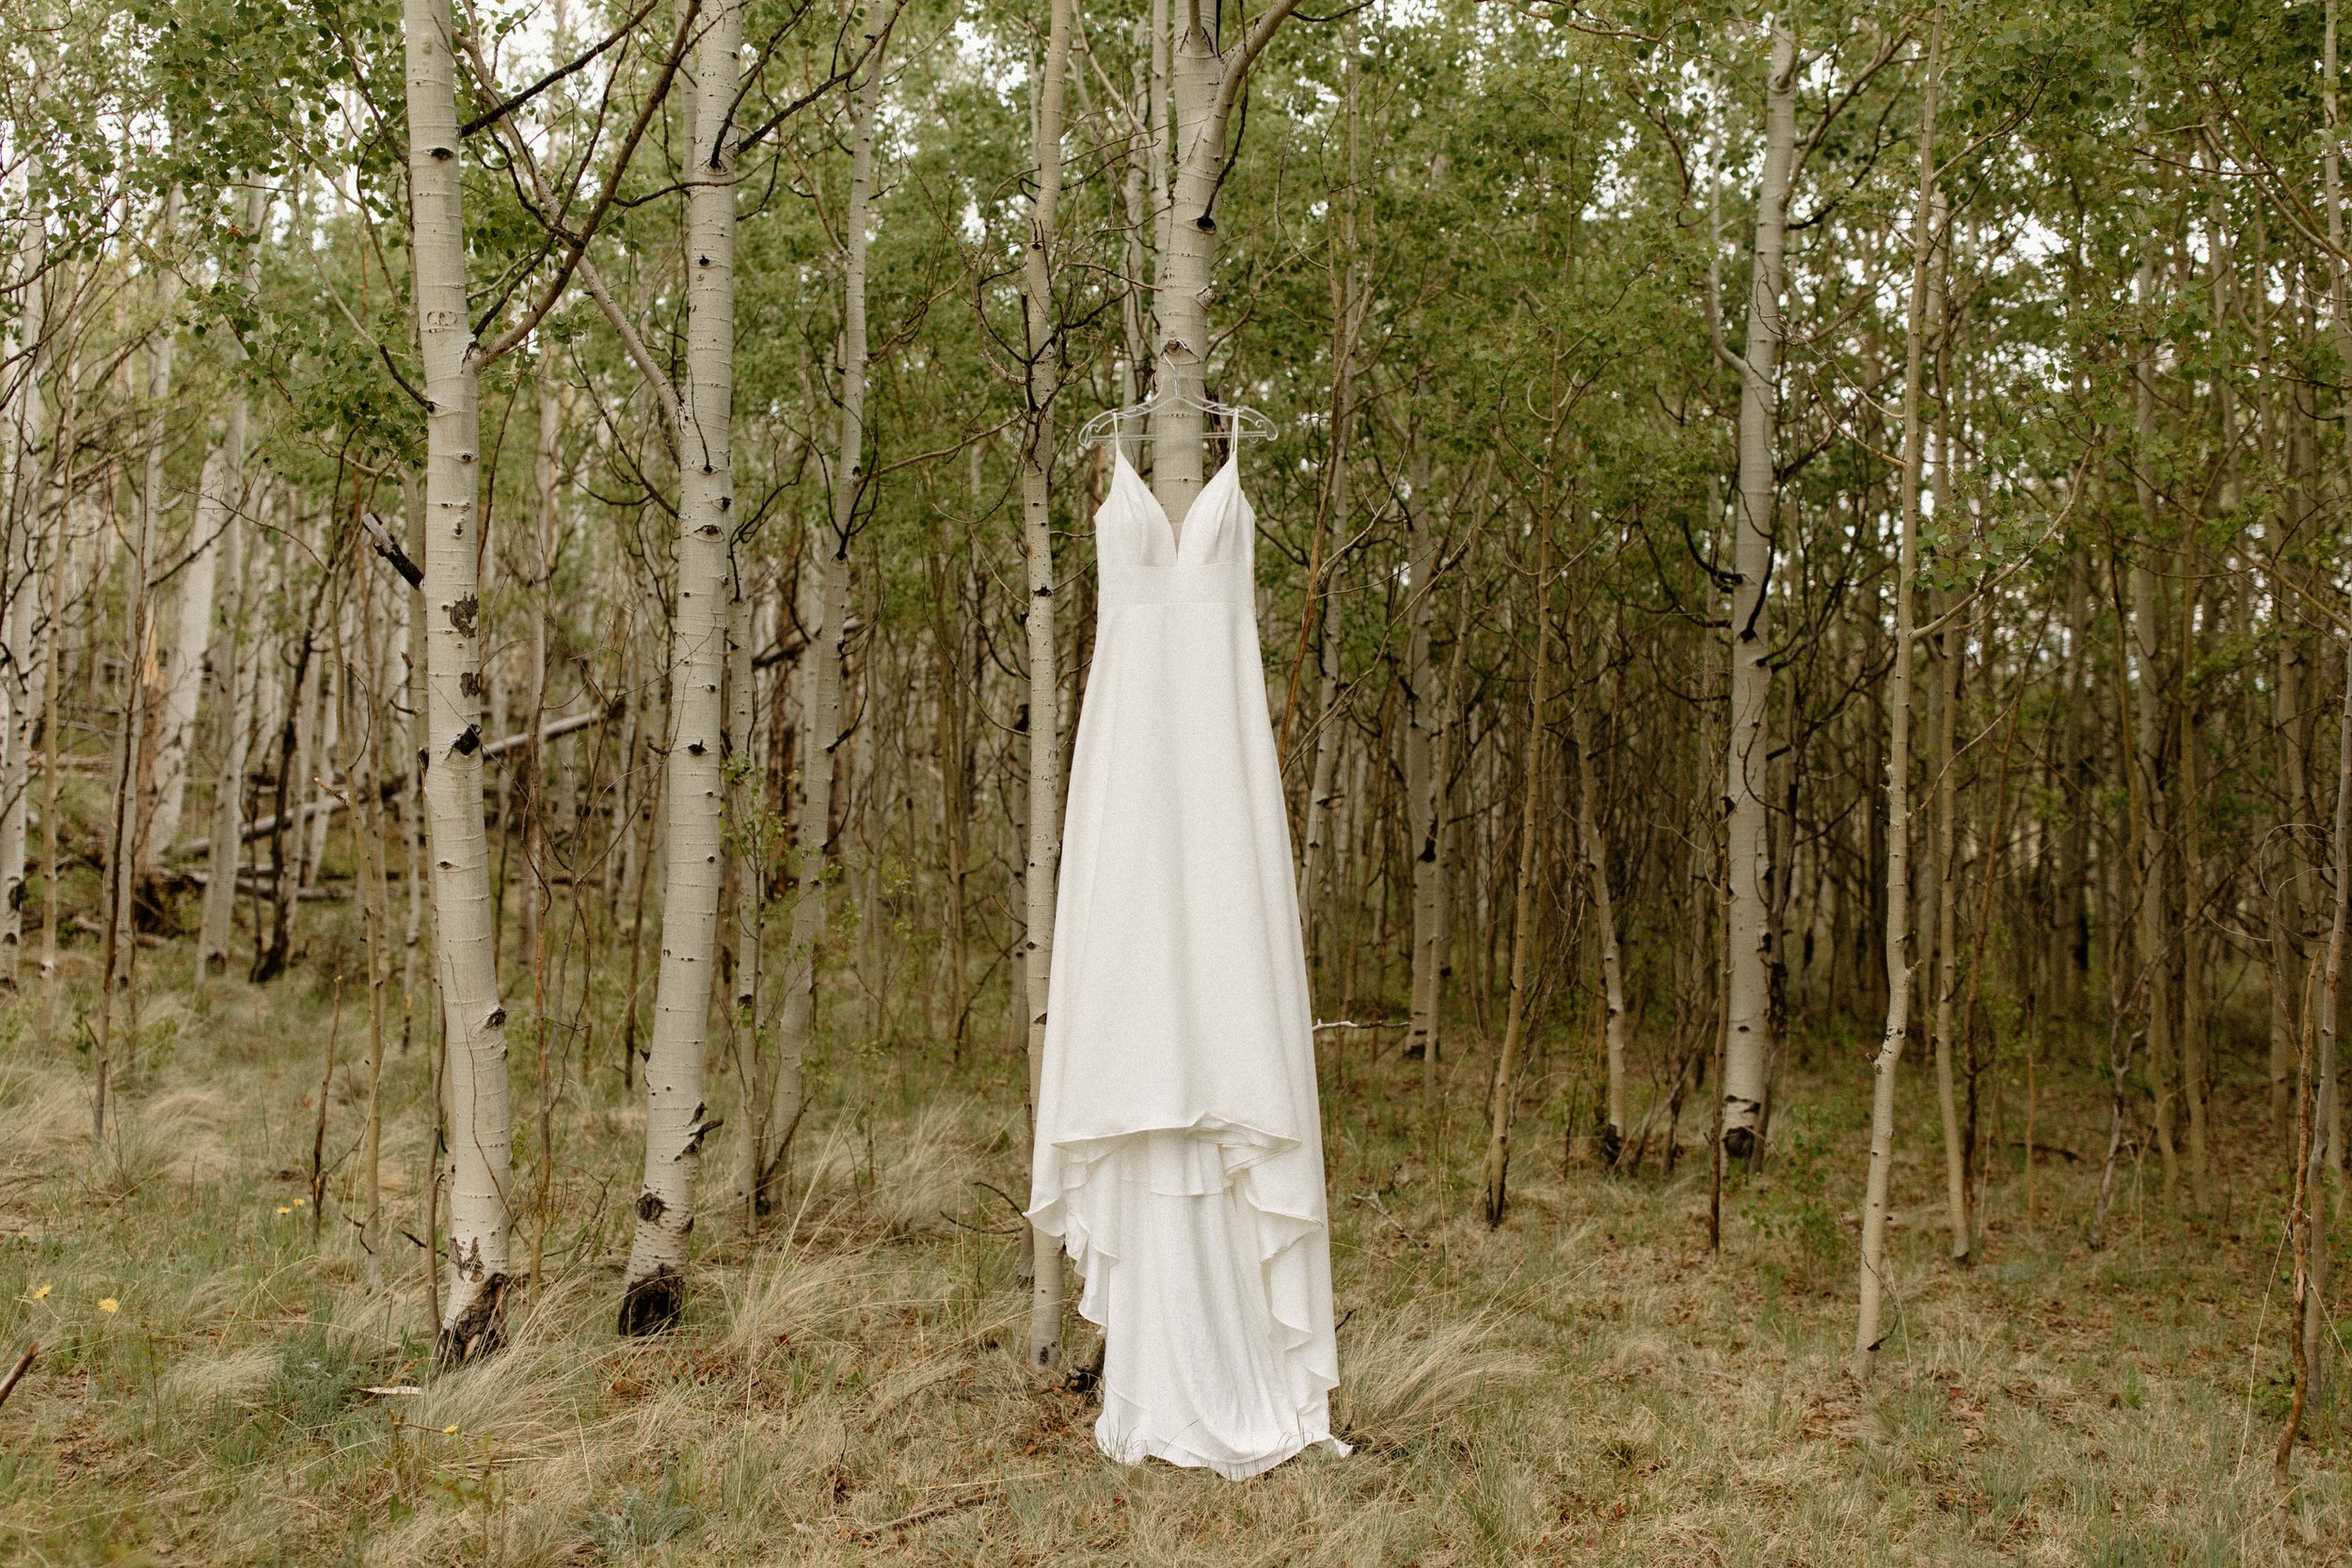 Beautiful, classic white wedding dress hanging among the aspen trees in Fairplay, Colorado